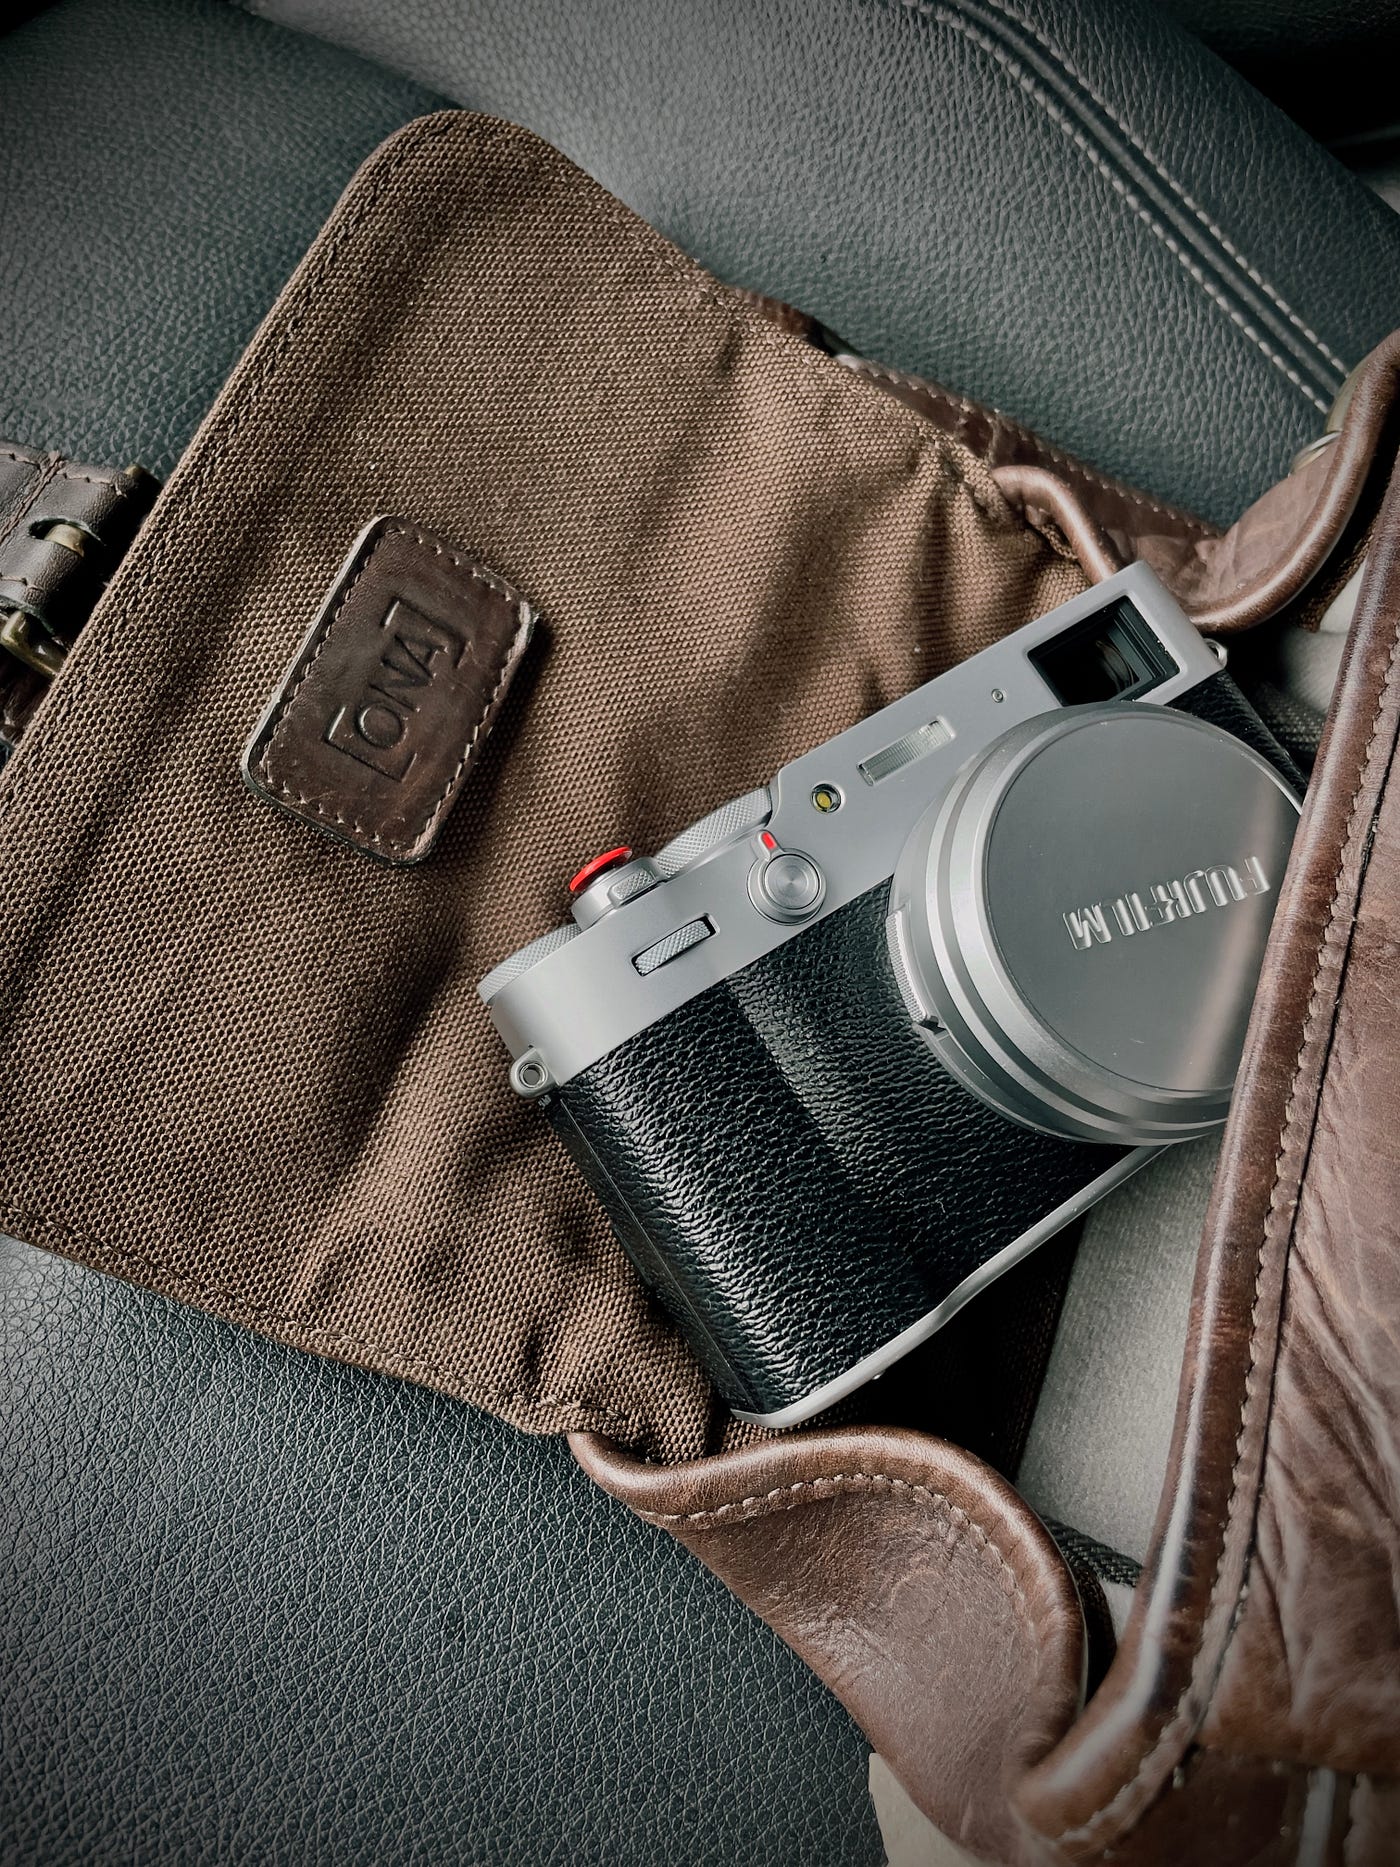 Fujifilm X100V Review: Full Coverage and Hands On Video - Moment